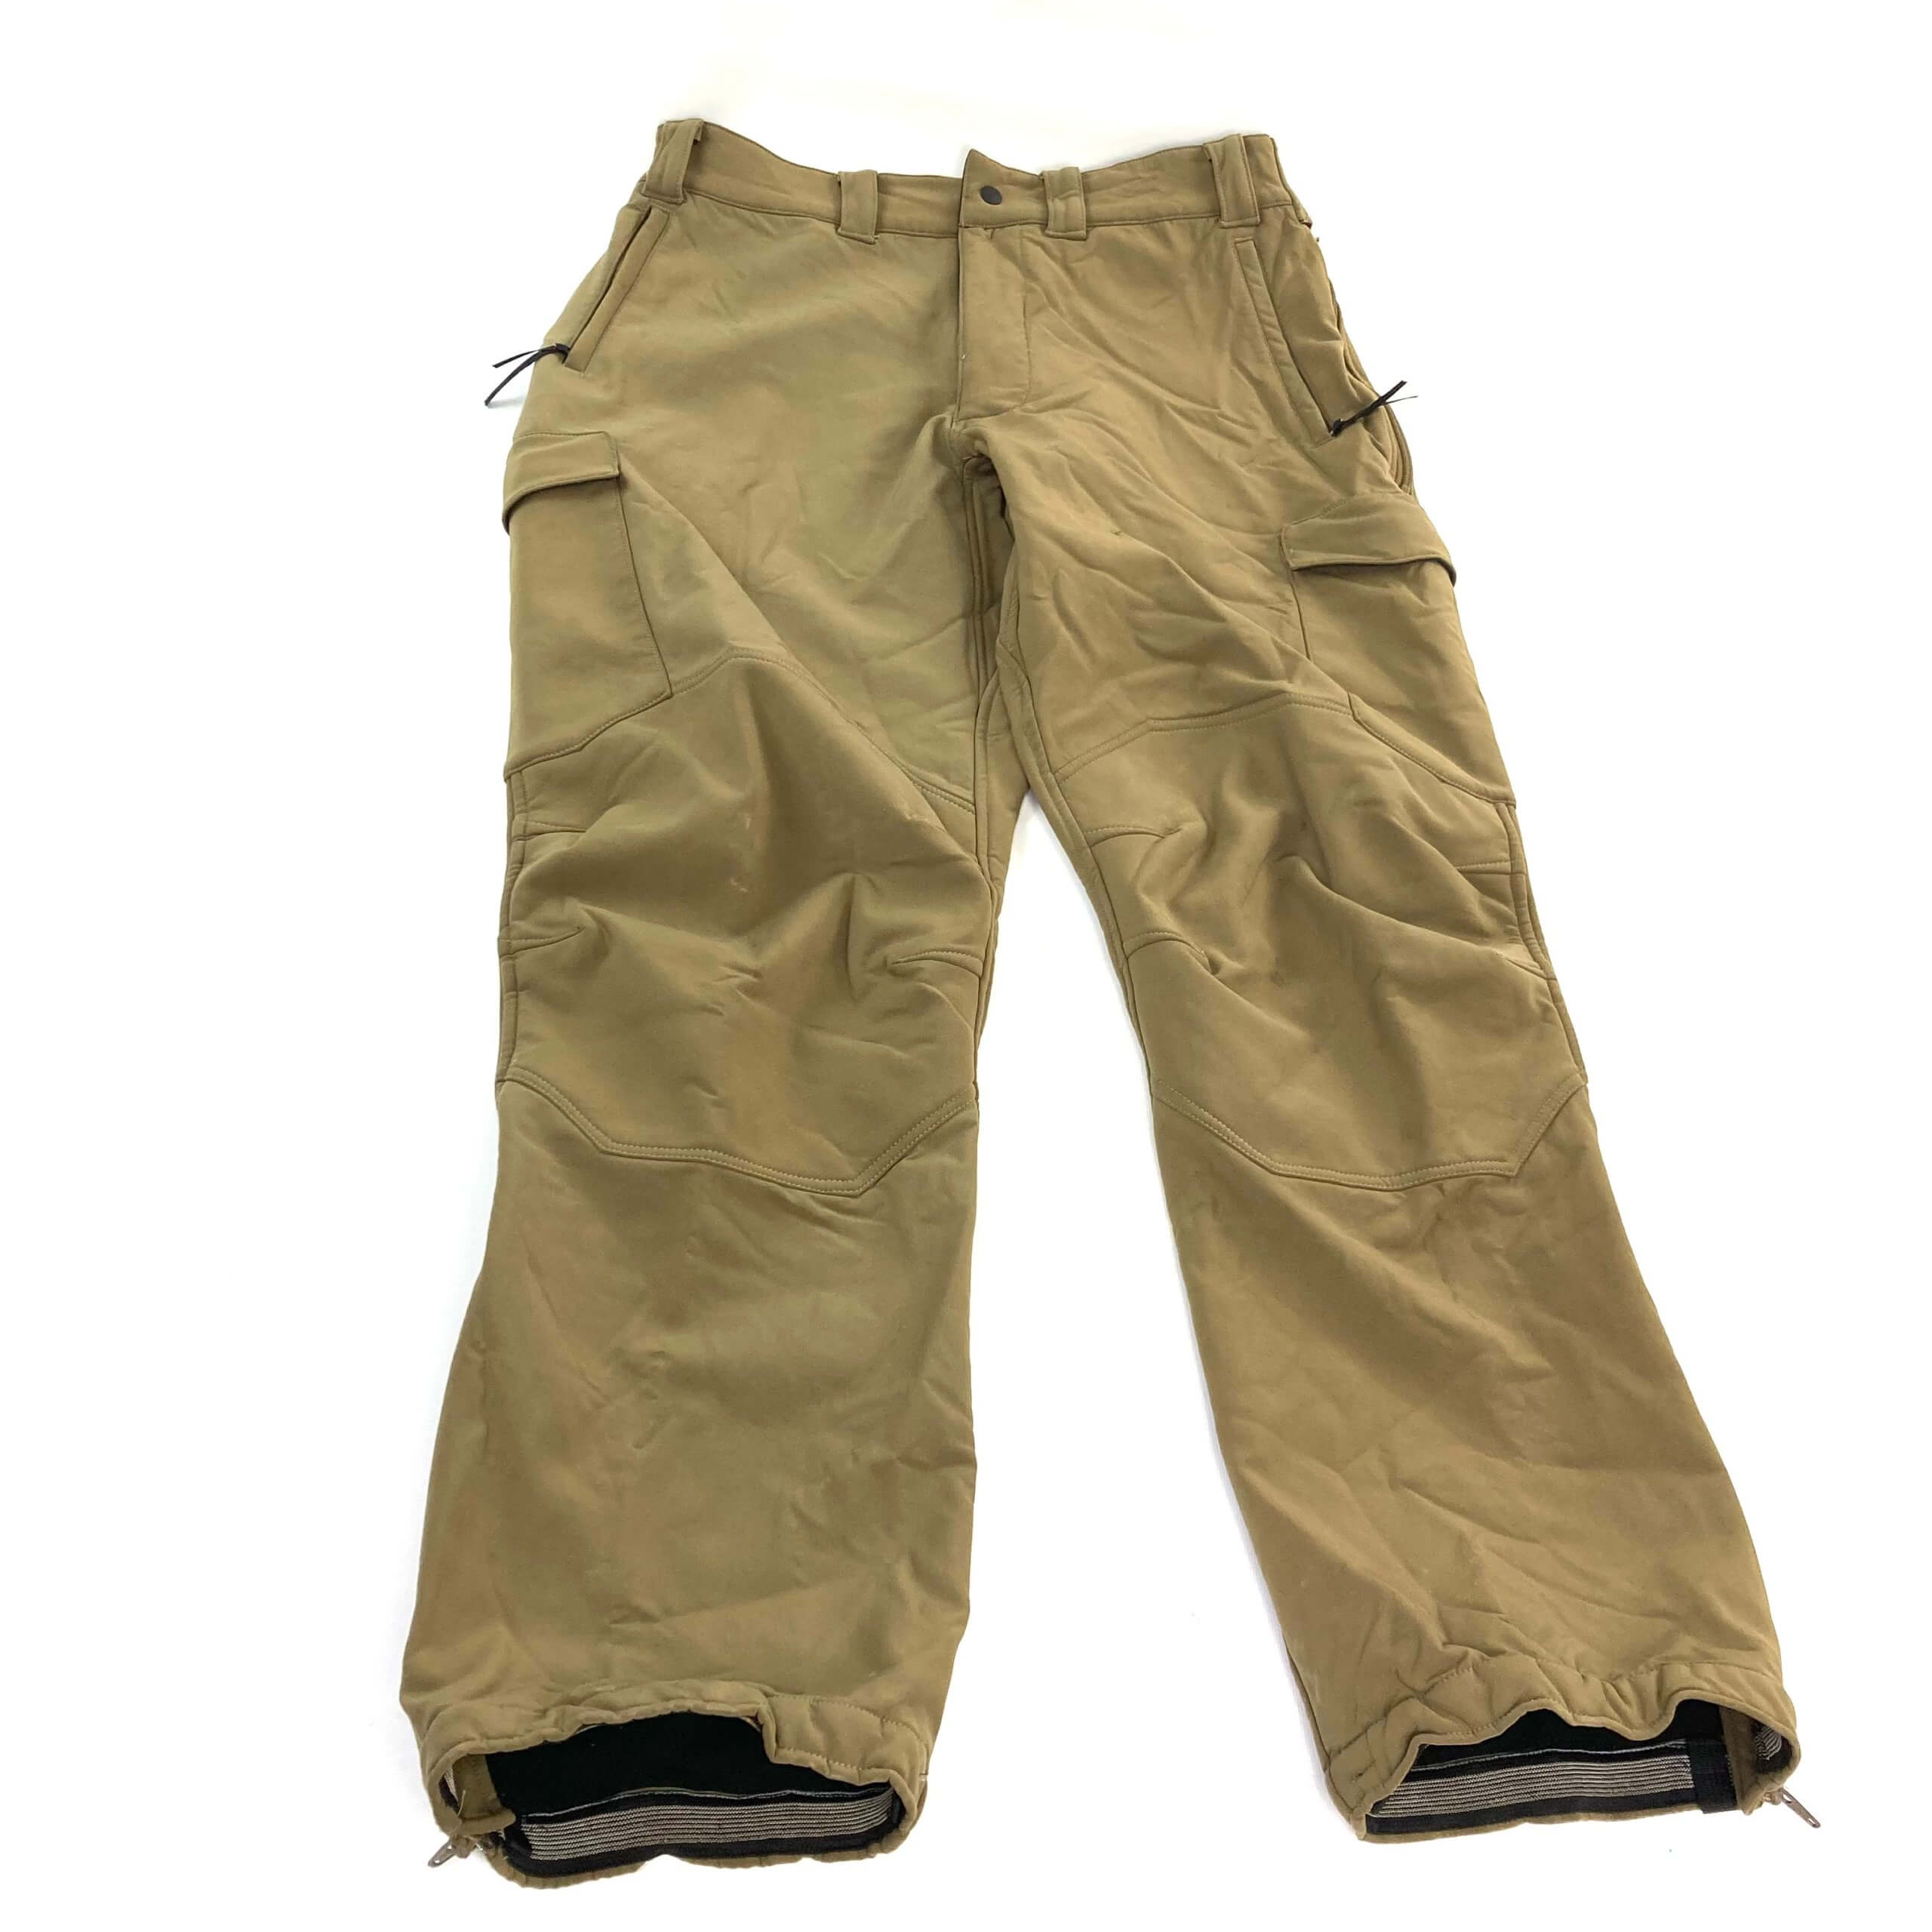 Beyond Clothing L5 PCU Soft Shell Pants, Coyote Brown - Venture